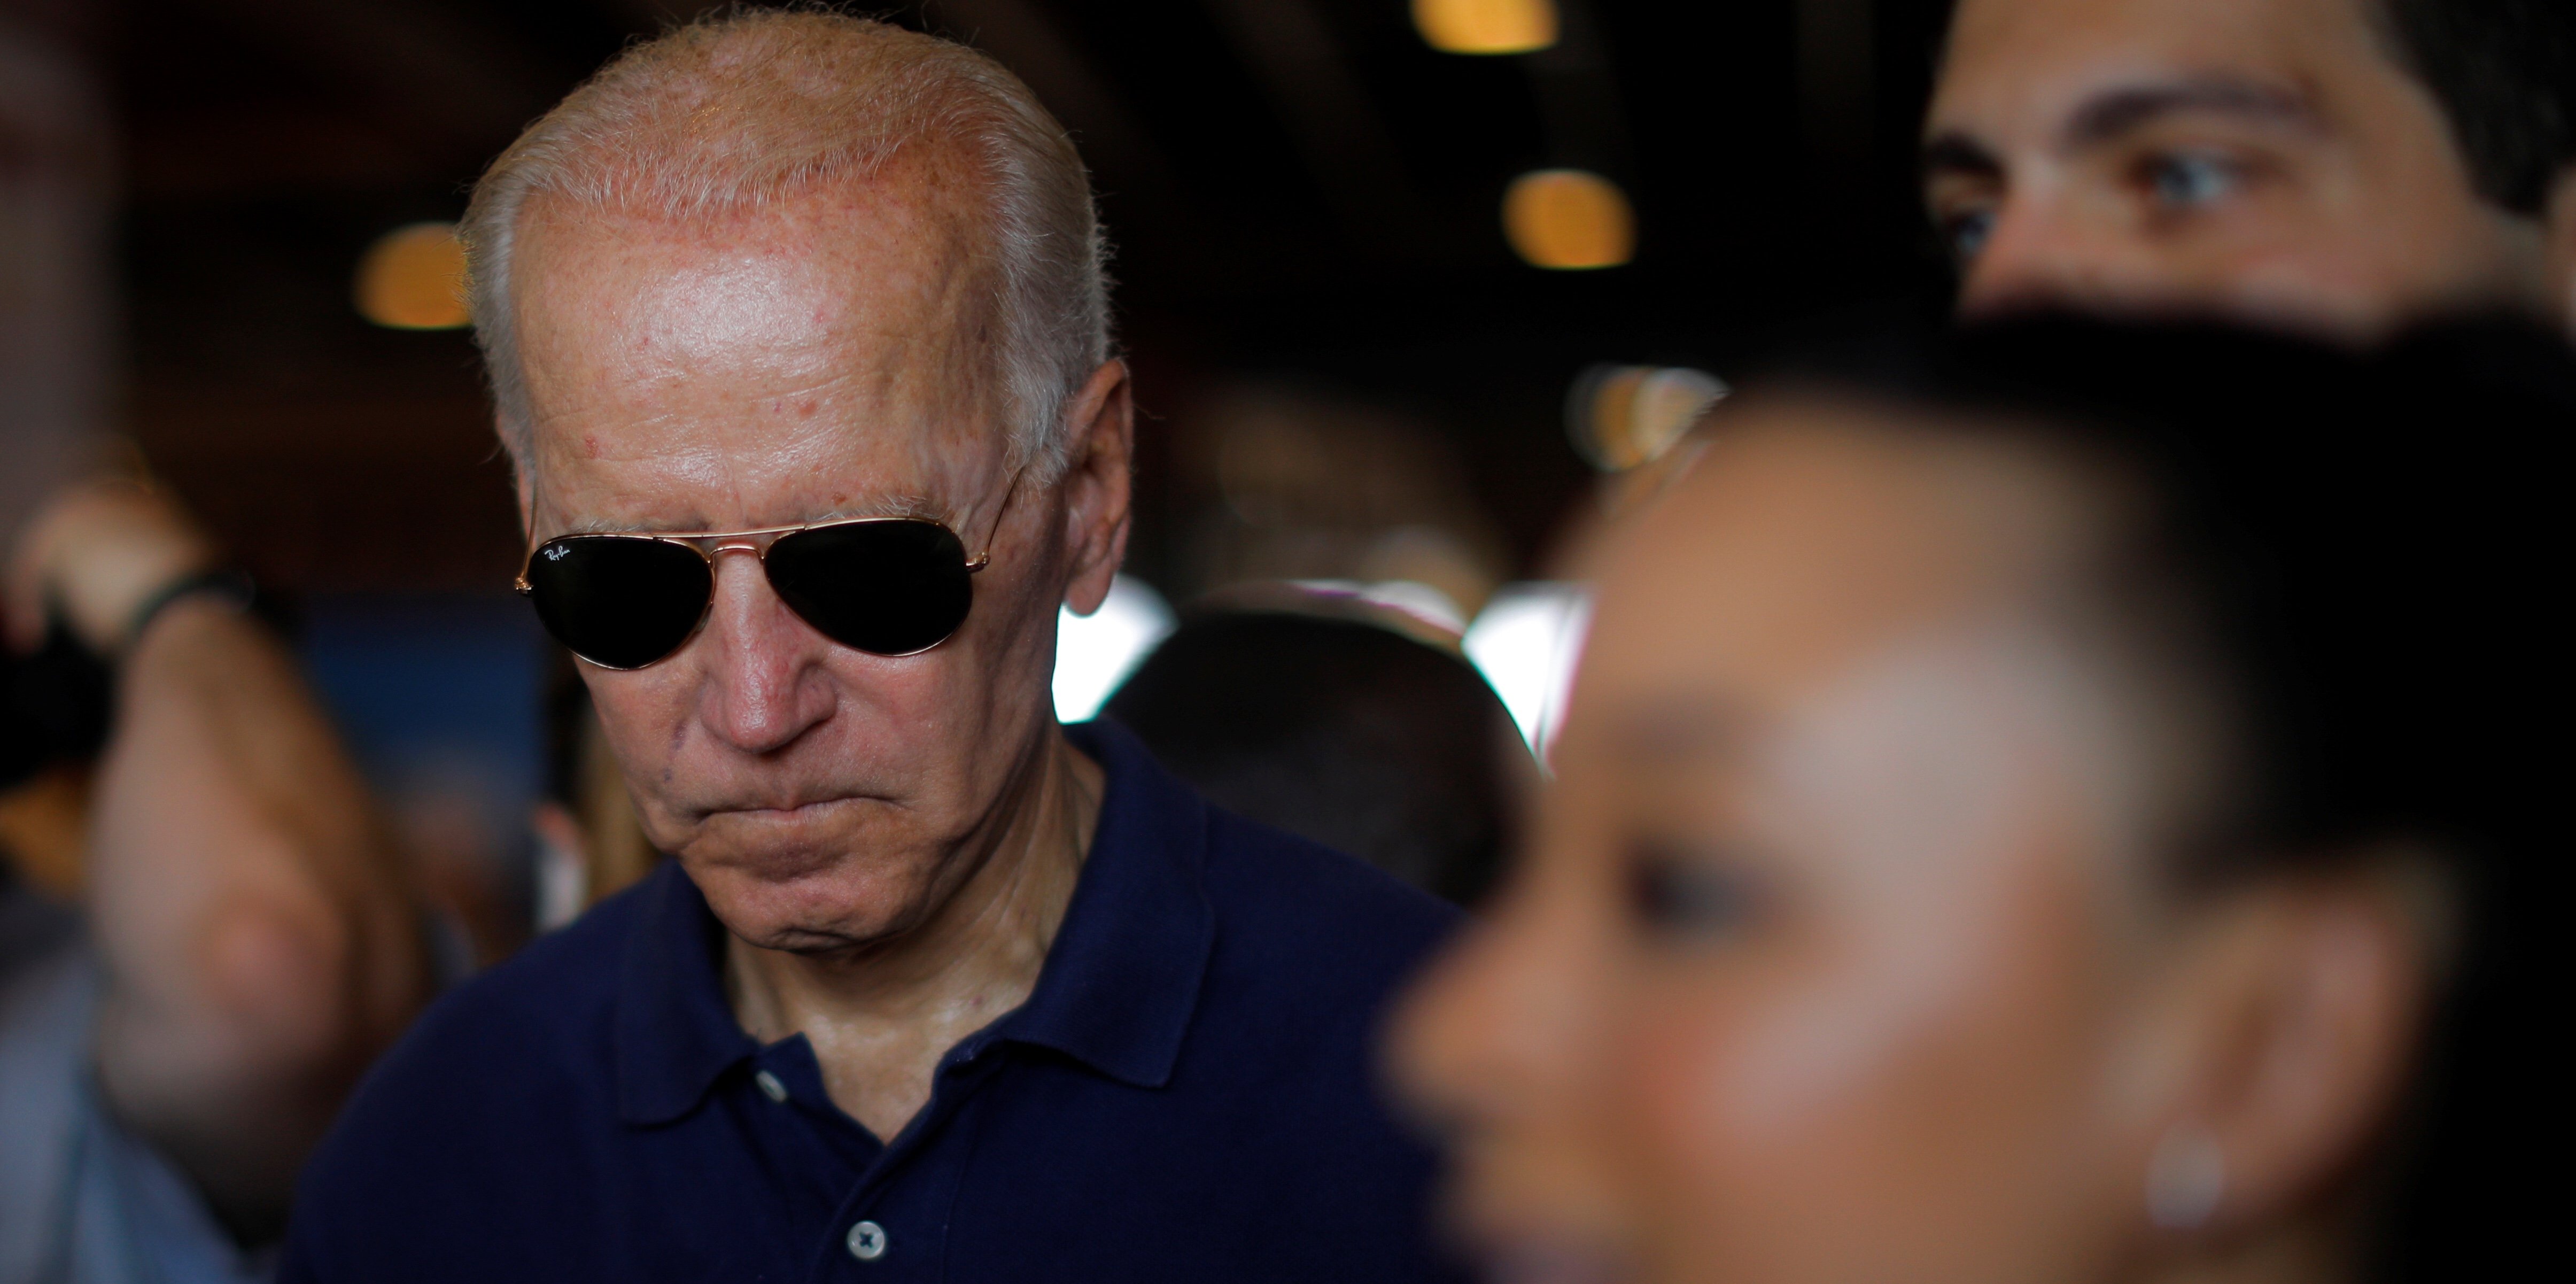 Democratic 2020 U.S. presidential candidate and former U.S. Vice President Joe Biden pauses while signing autographs at the Iowa State Fair in Des Moines, Iowa, U.S., August 8, 2019. REUTERS/Brian Snyder